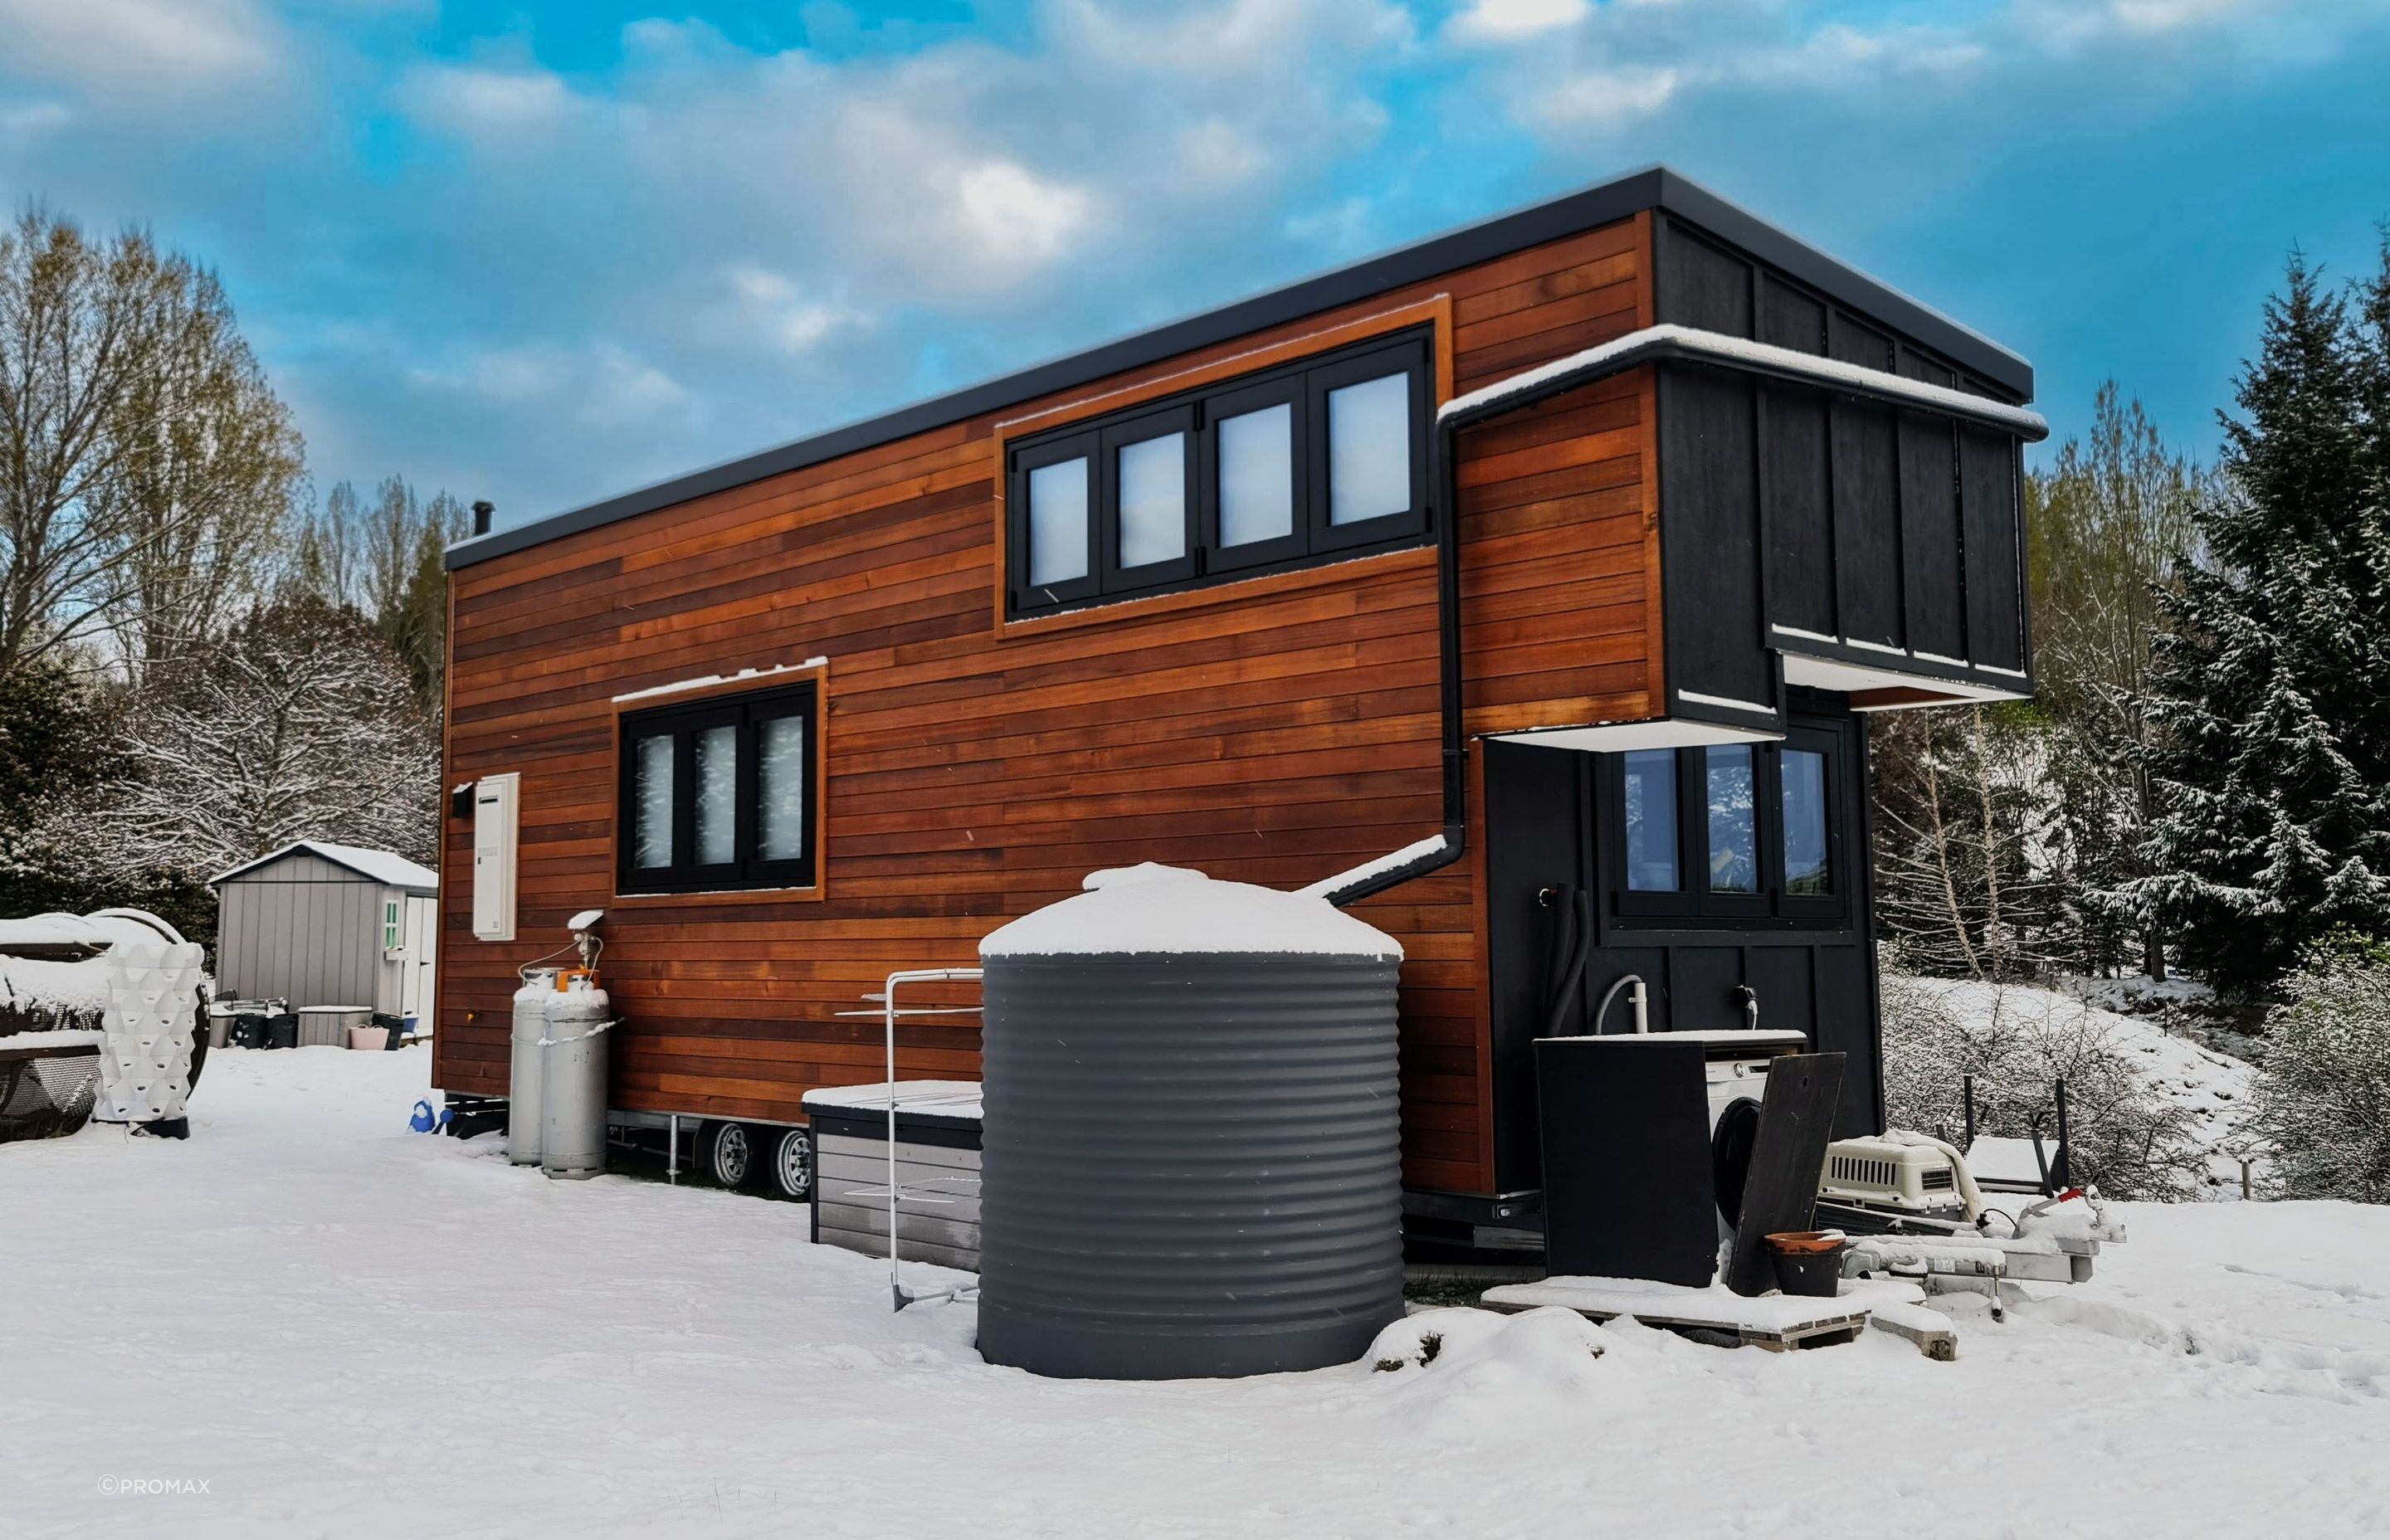 The Promax 3,000 litre ENDURO water tank fitted here is one of the many great solutions to utilities in this cosy and stylish tiny home in Central Otago